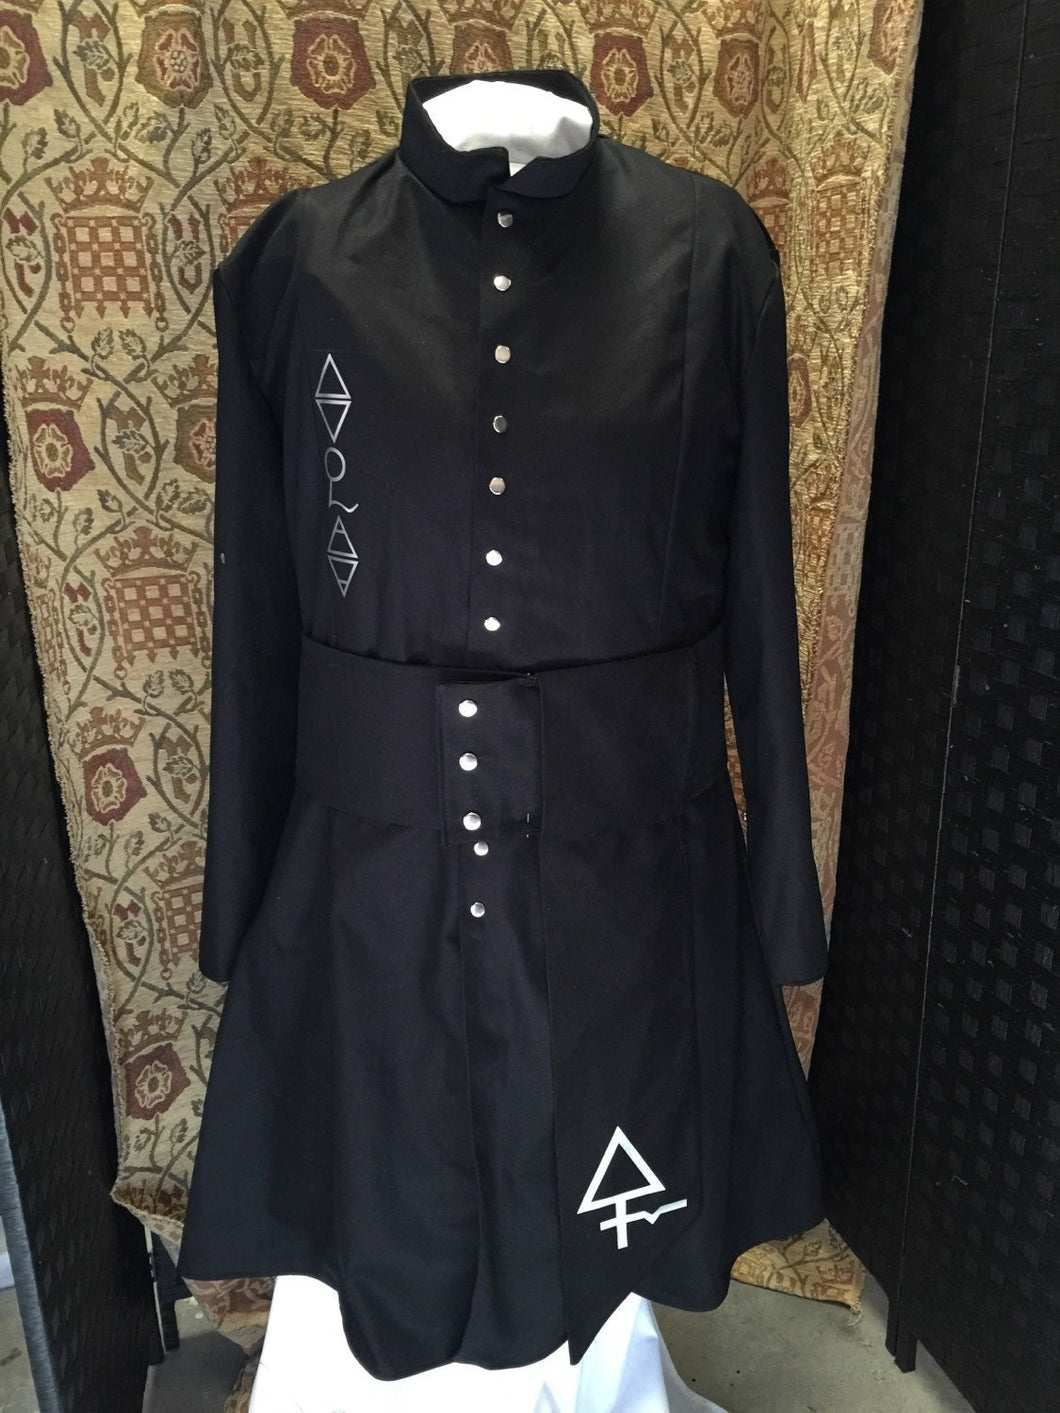 Ghost Band inspired coat including sash